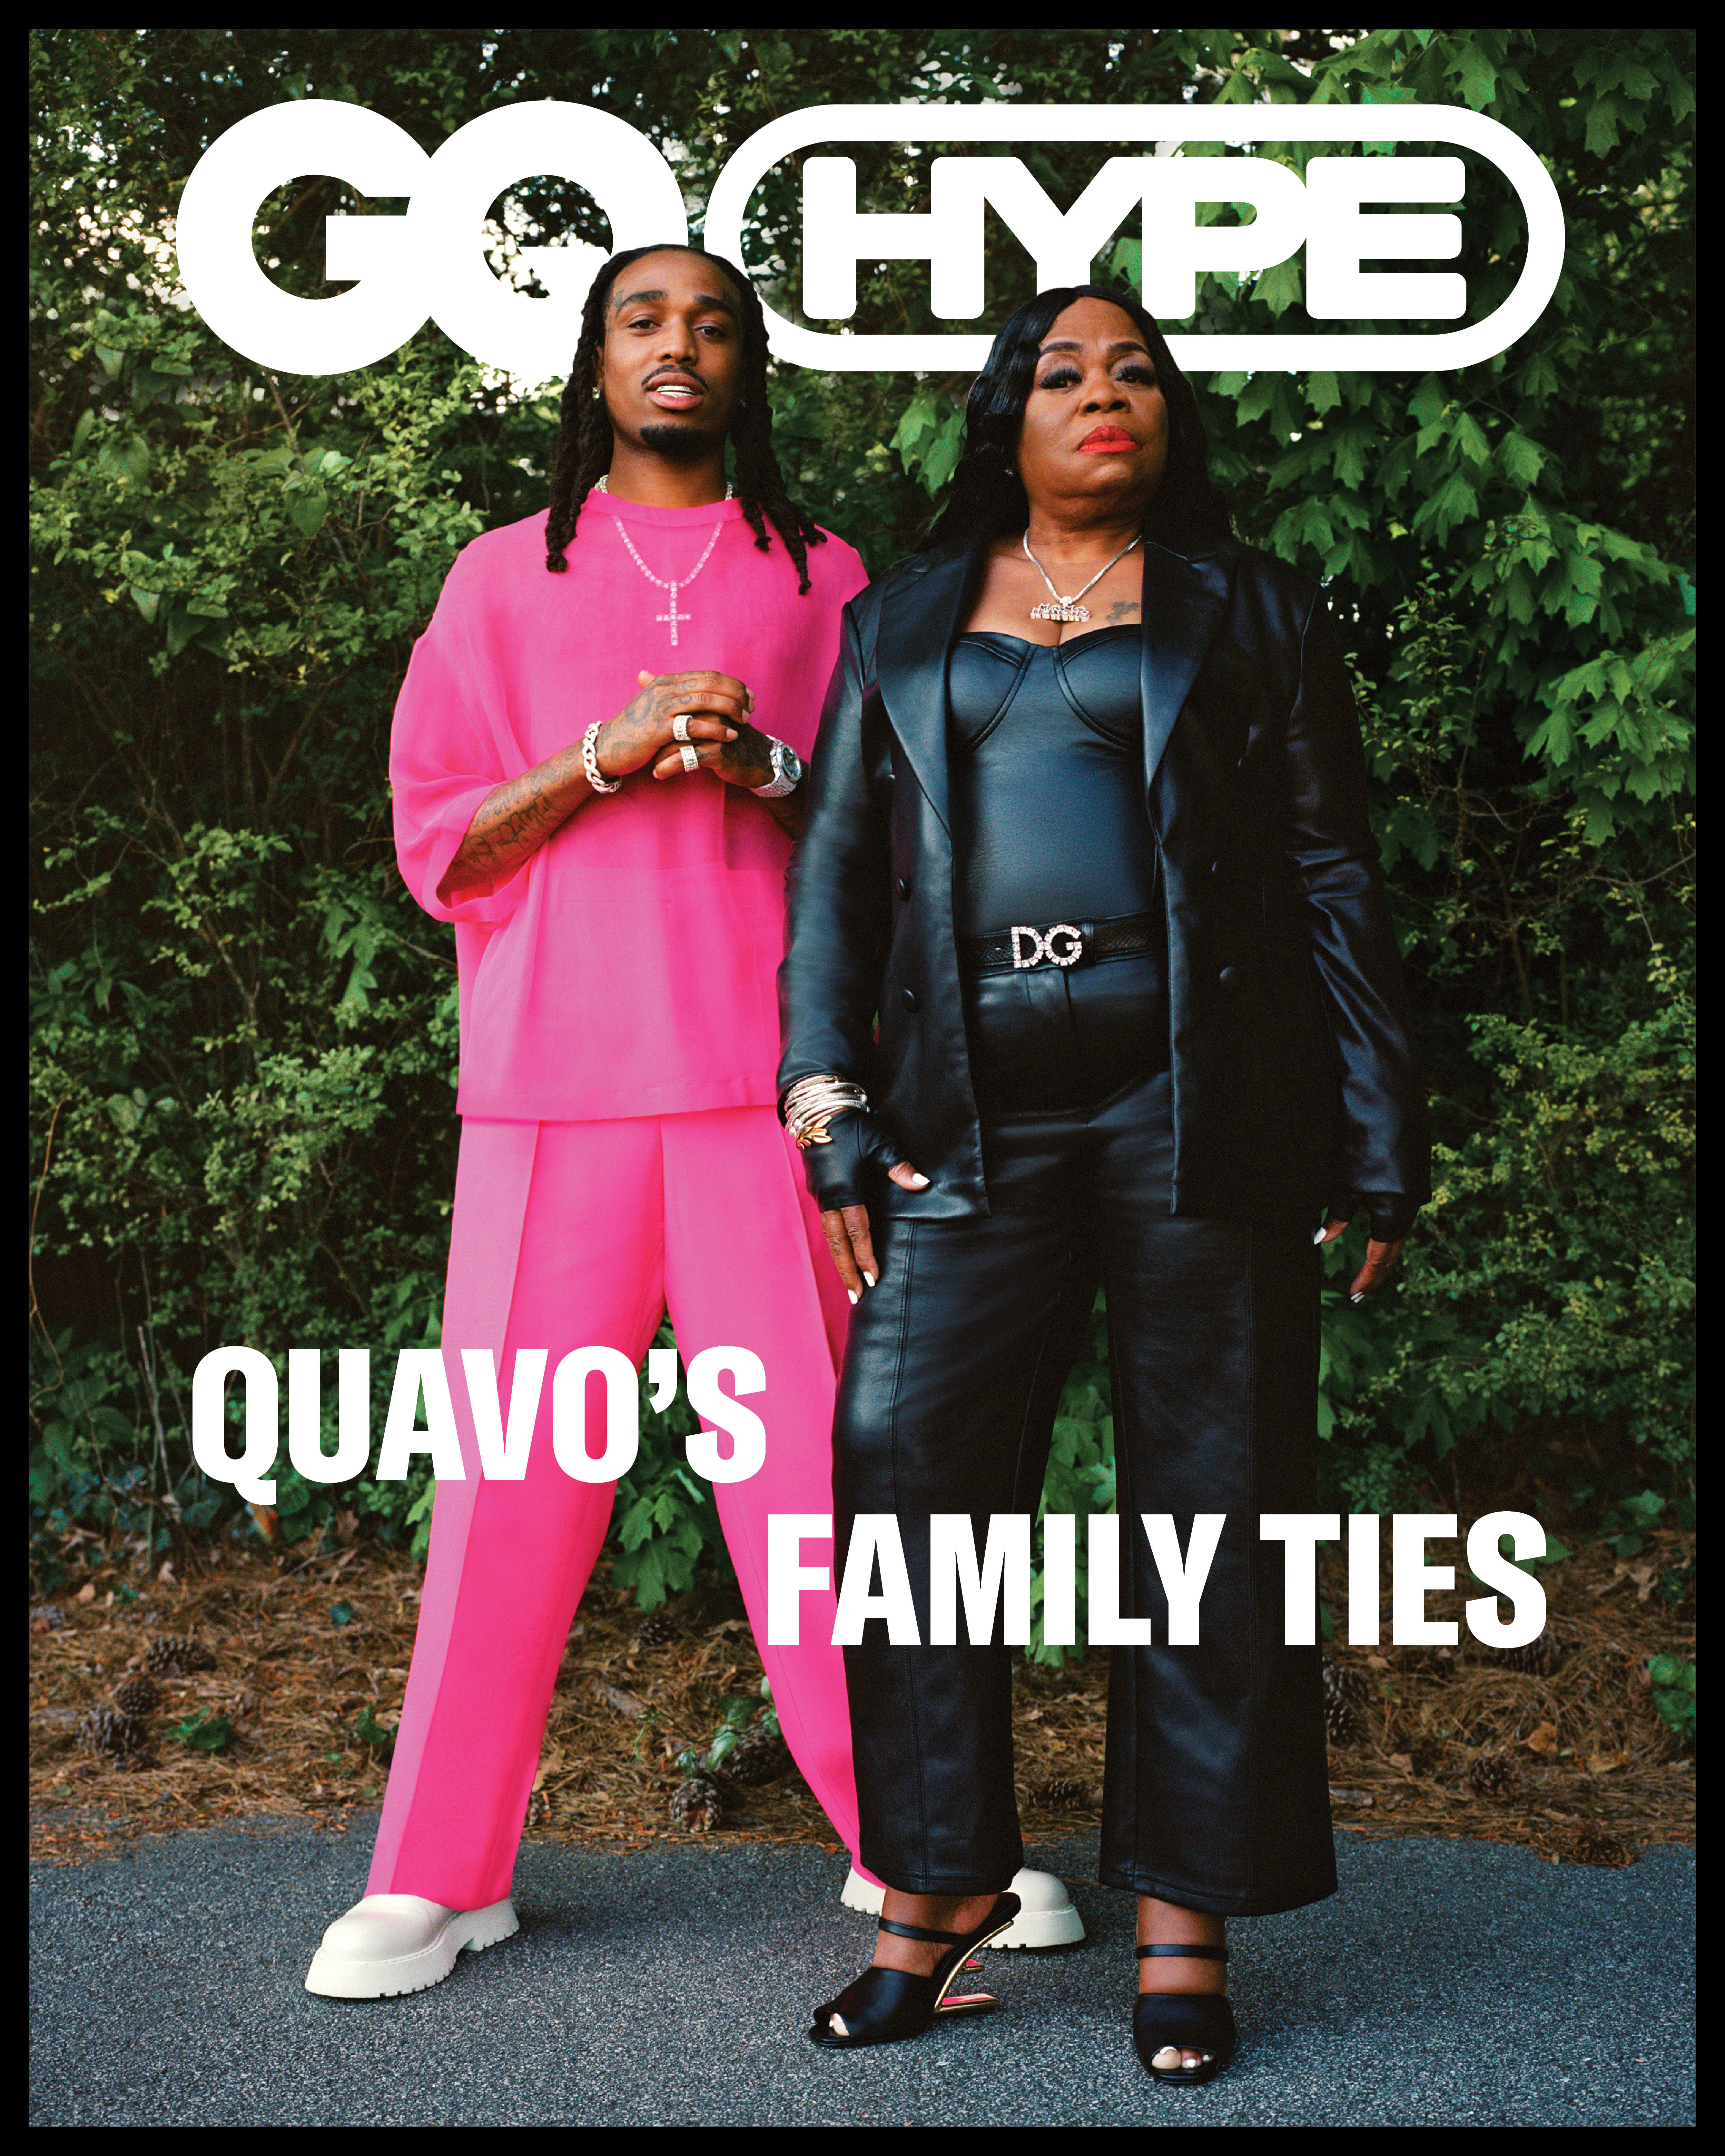 Quavo and his mom are pictured together for GQ